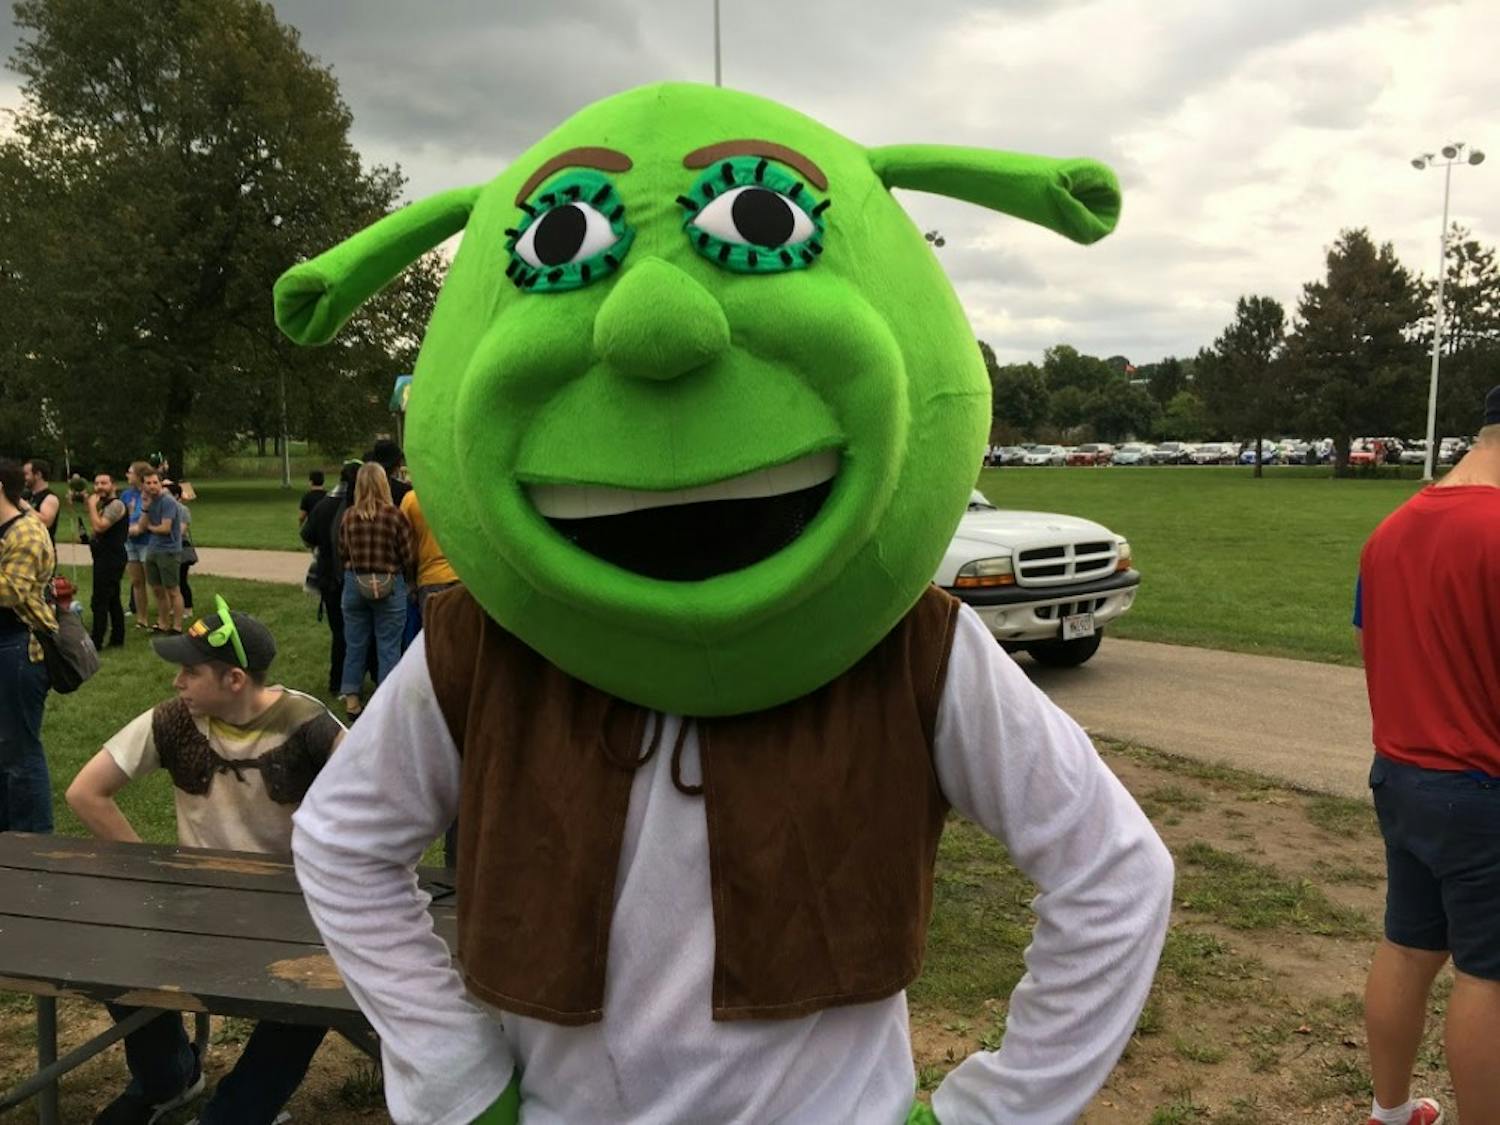 Shrekfest 2018 may very possibly have been the weirdest thing to ever exist, which is certainly welcomed by the organizers.